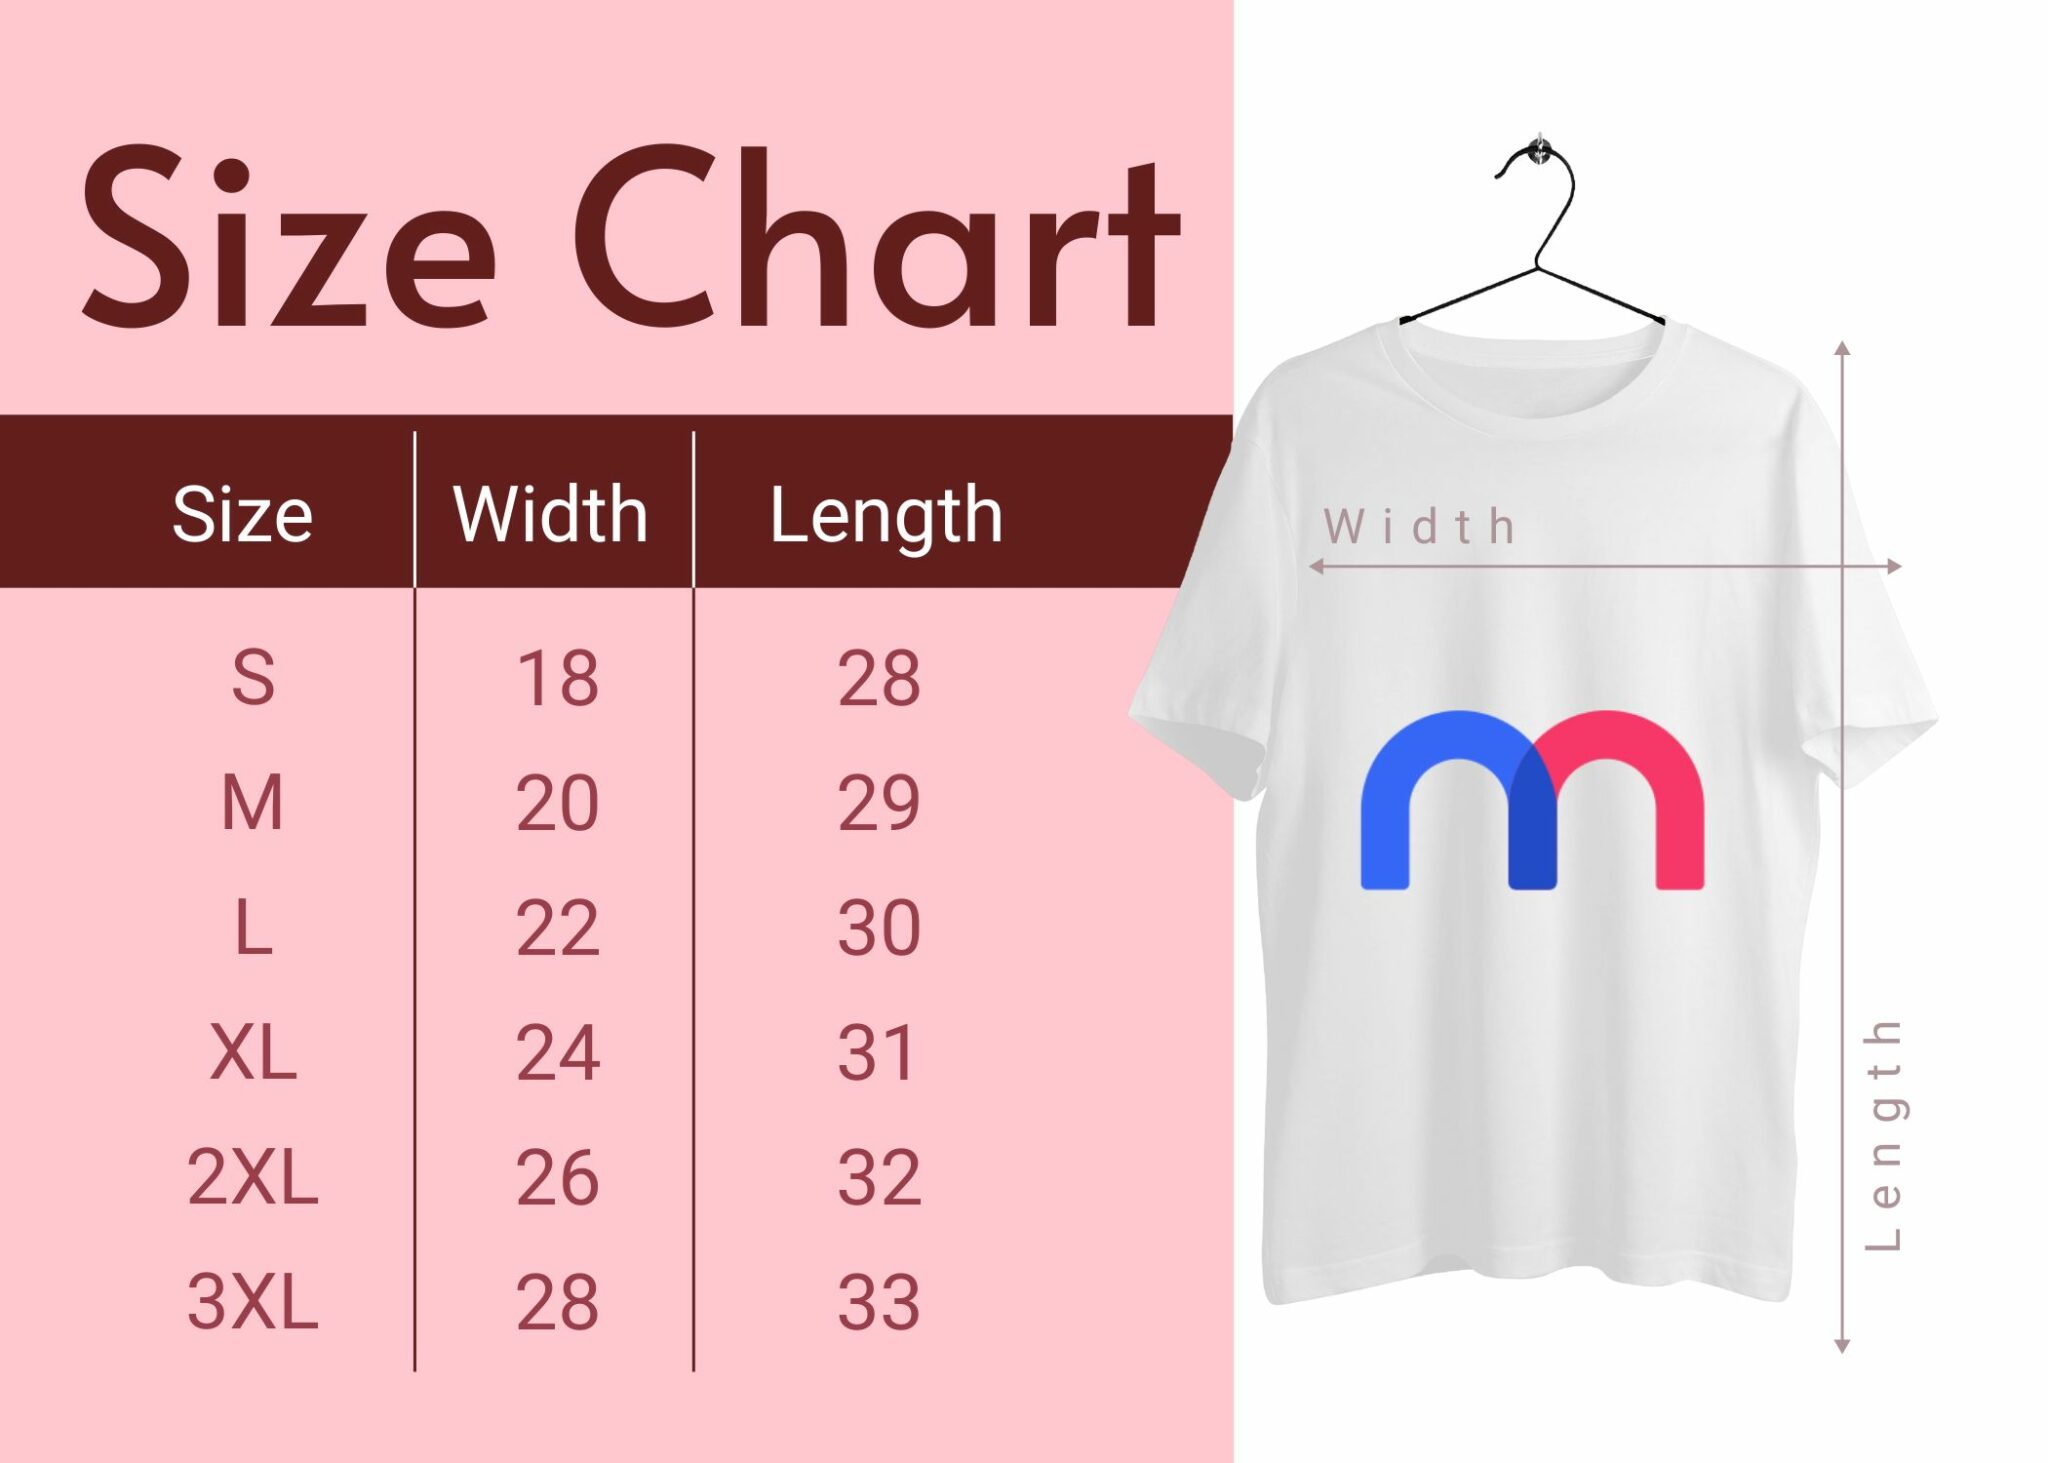 Sizing Guide Chart Template